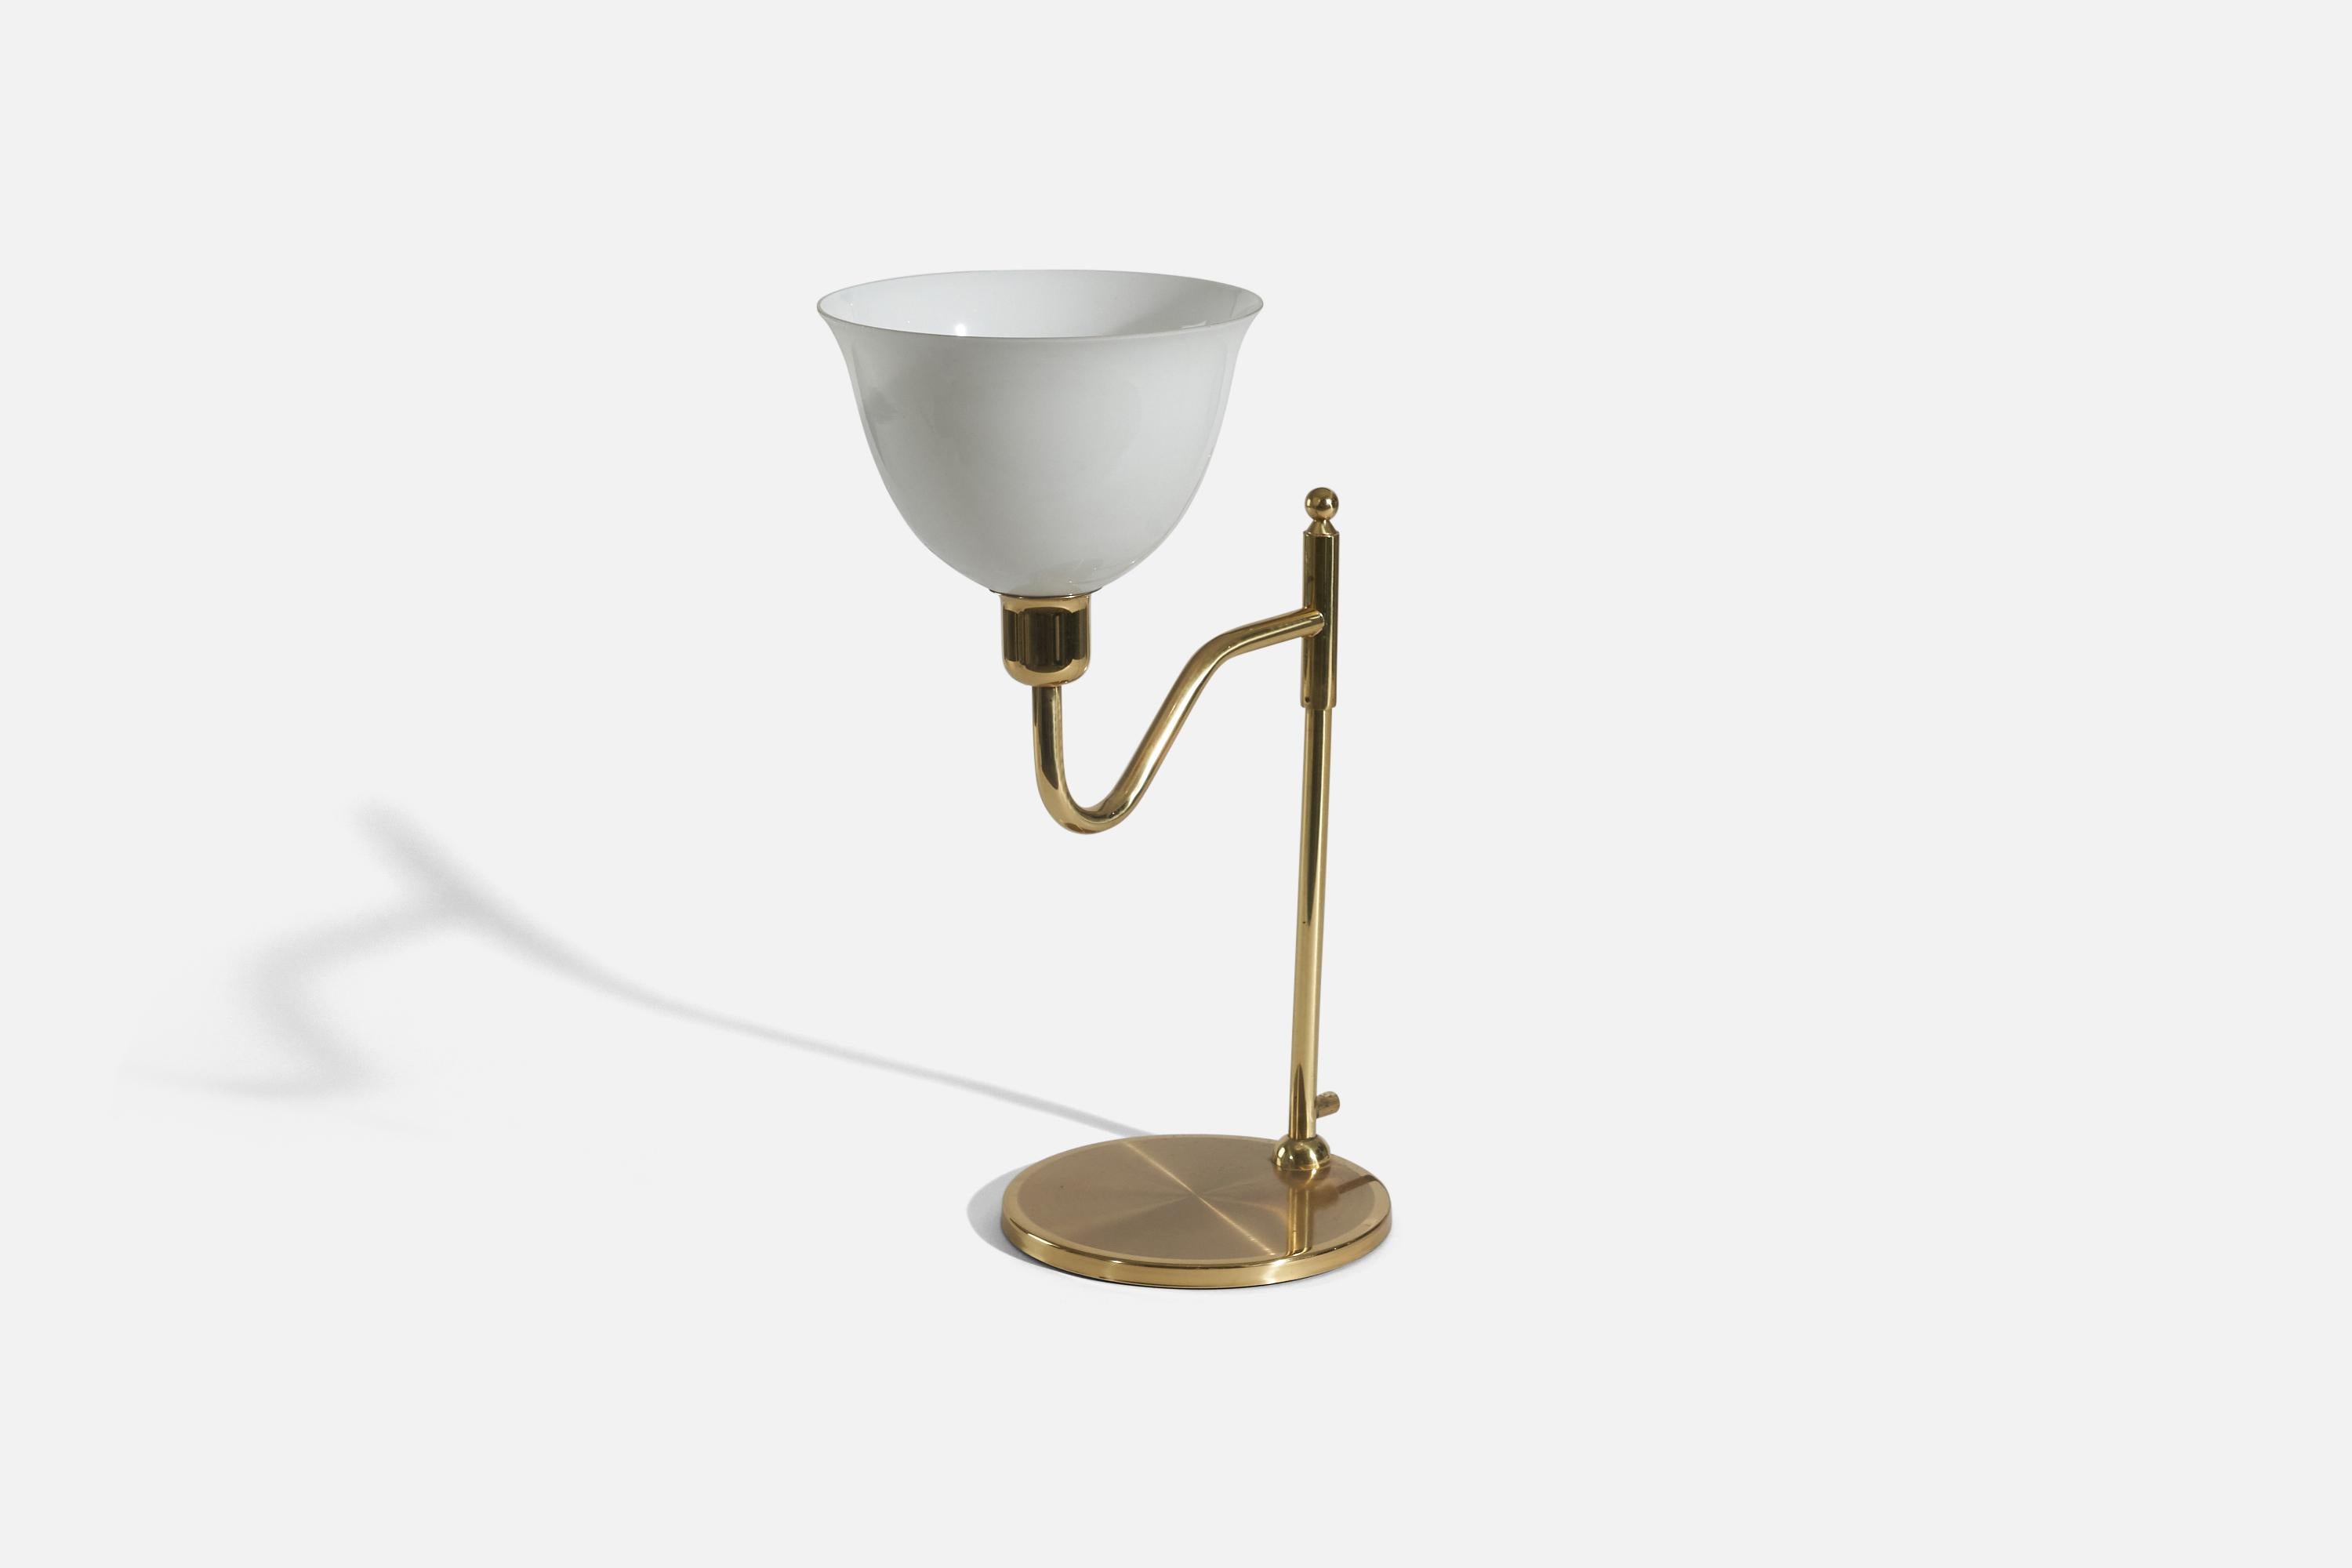 A brass and glass table lamp designed and produced by Bergboms, Sweden, c. 1970s.

Socket takes standard E-26 medium base bulb.
The maximum wattage stated on the fixture is 60.